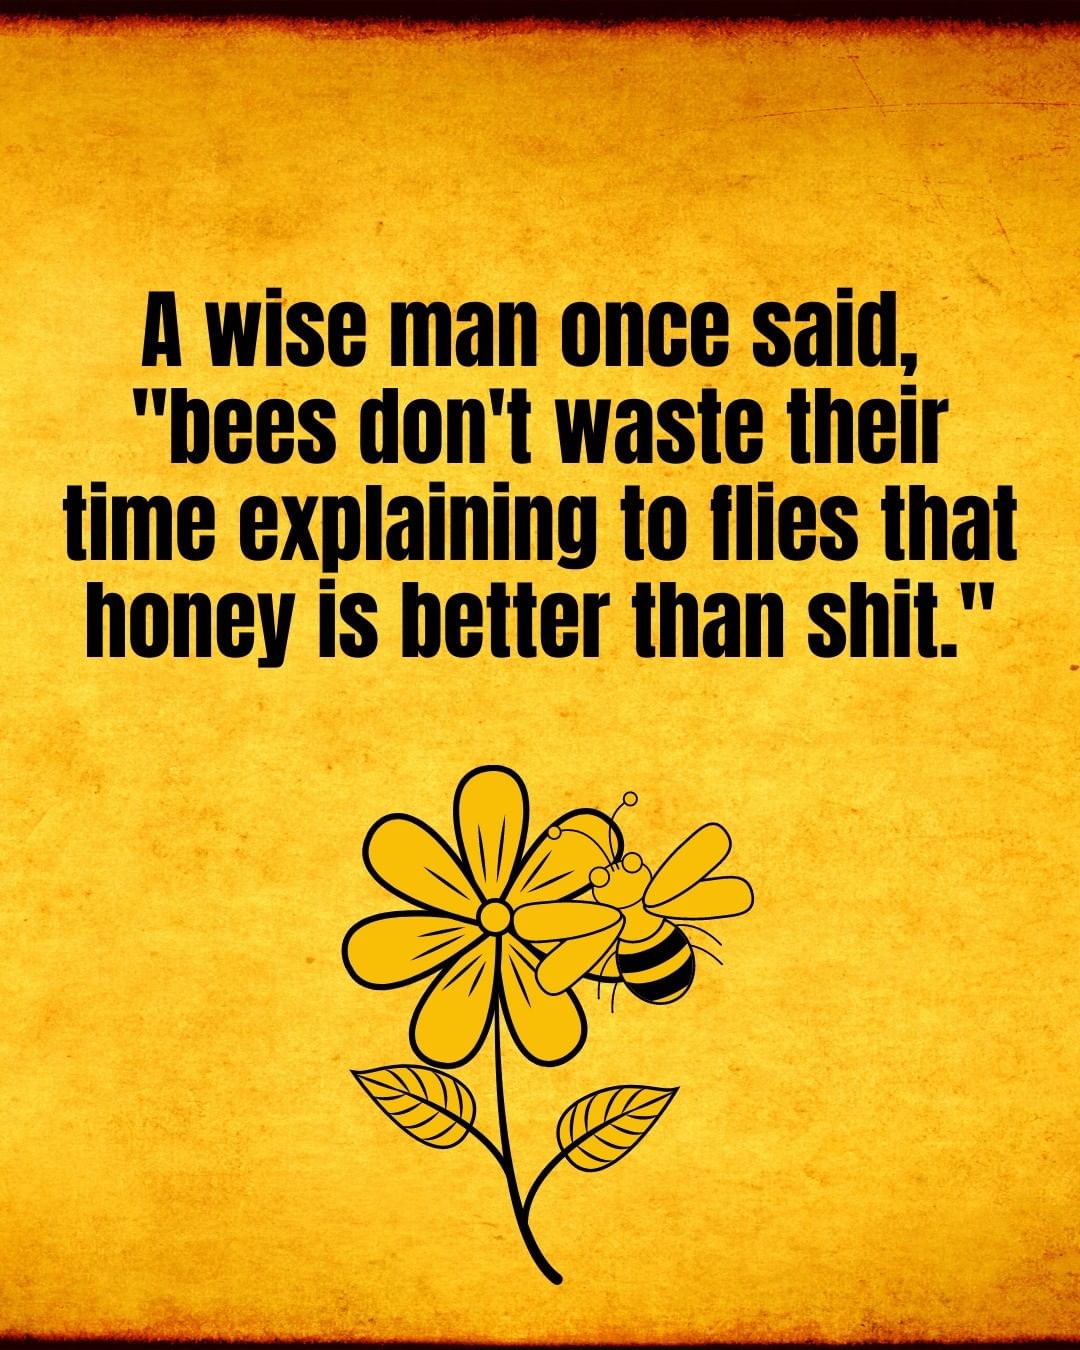 A wise man once said. Bees don't waste their time explaining to flies that honey is better than shit.